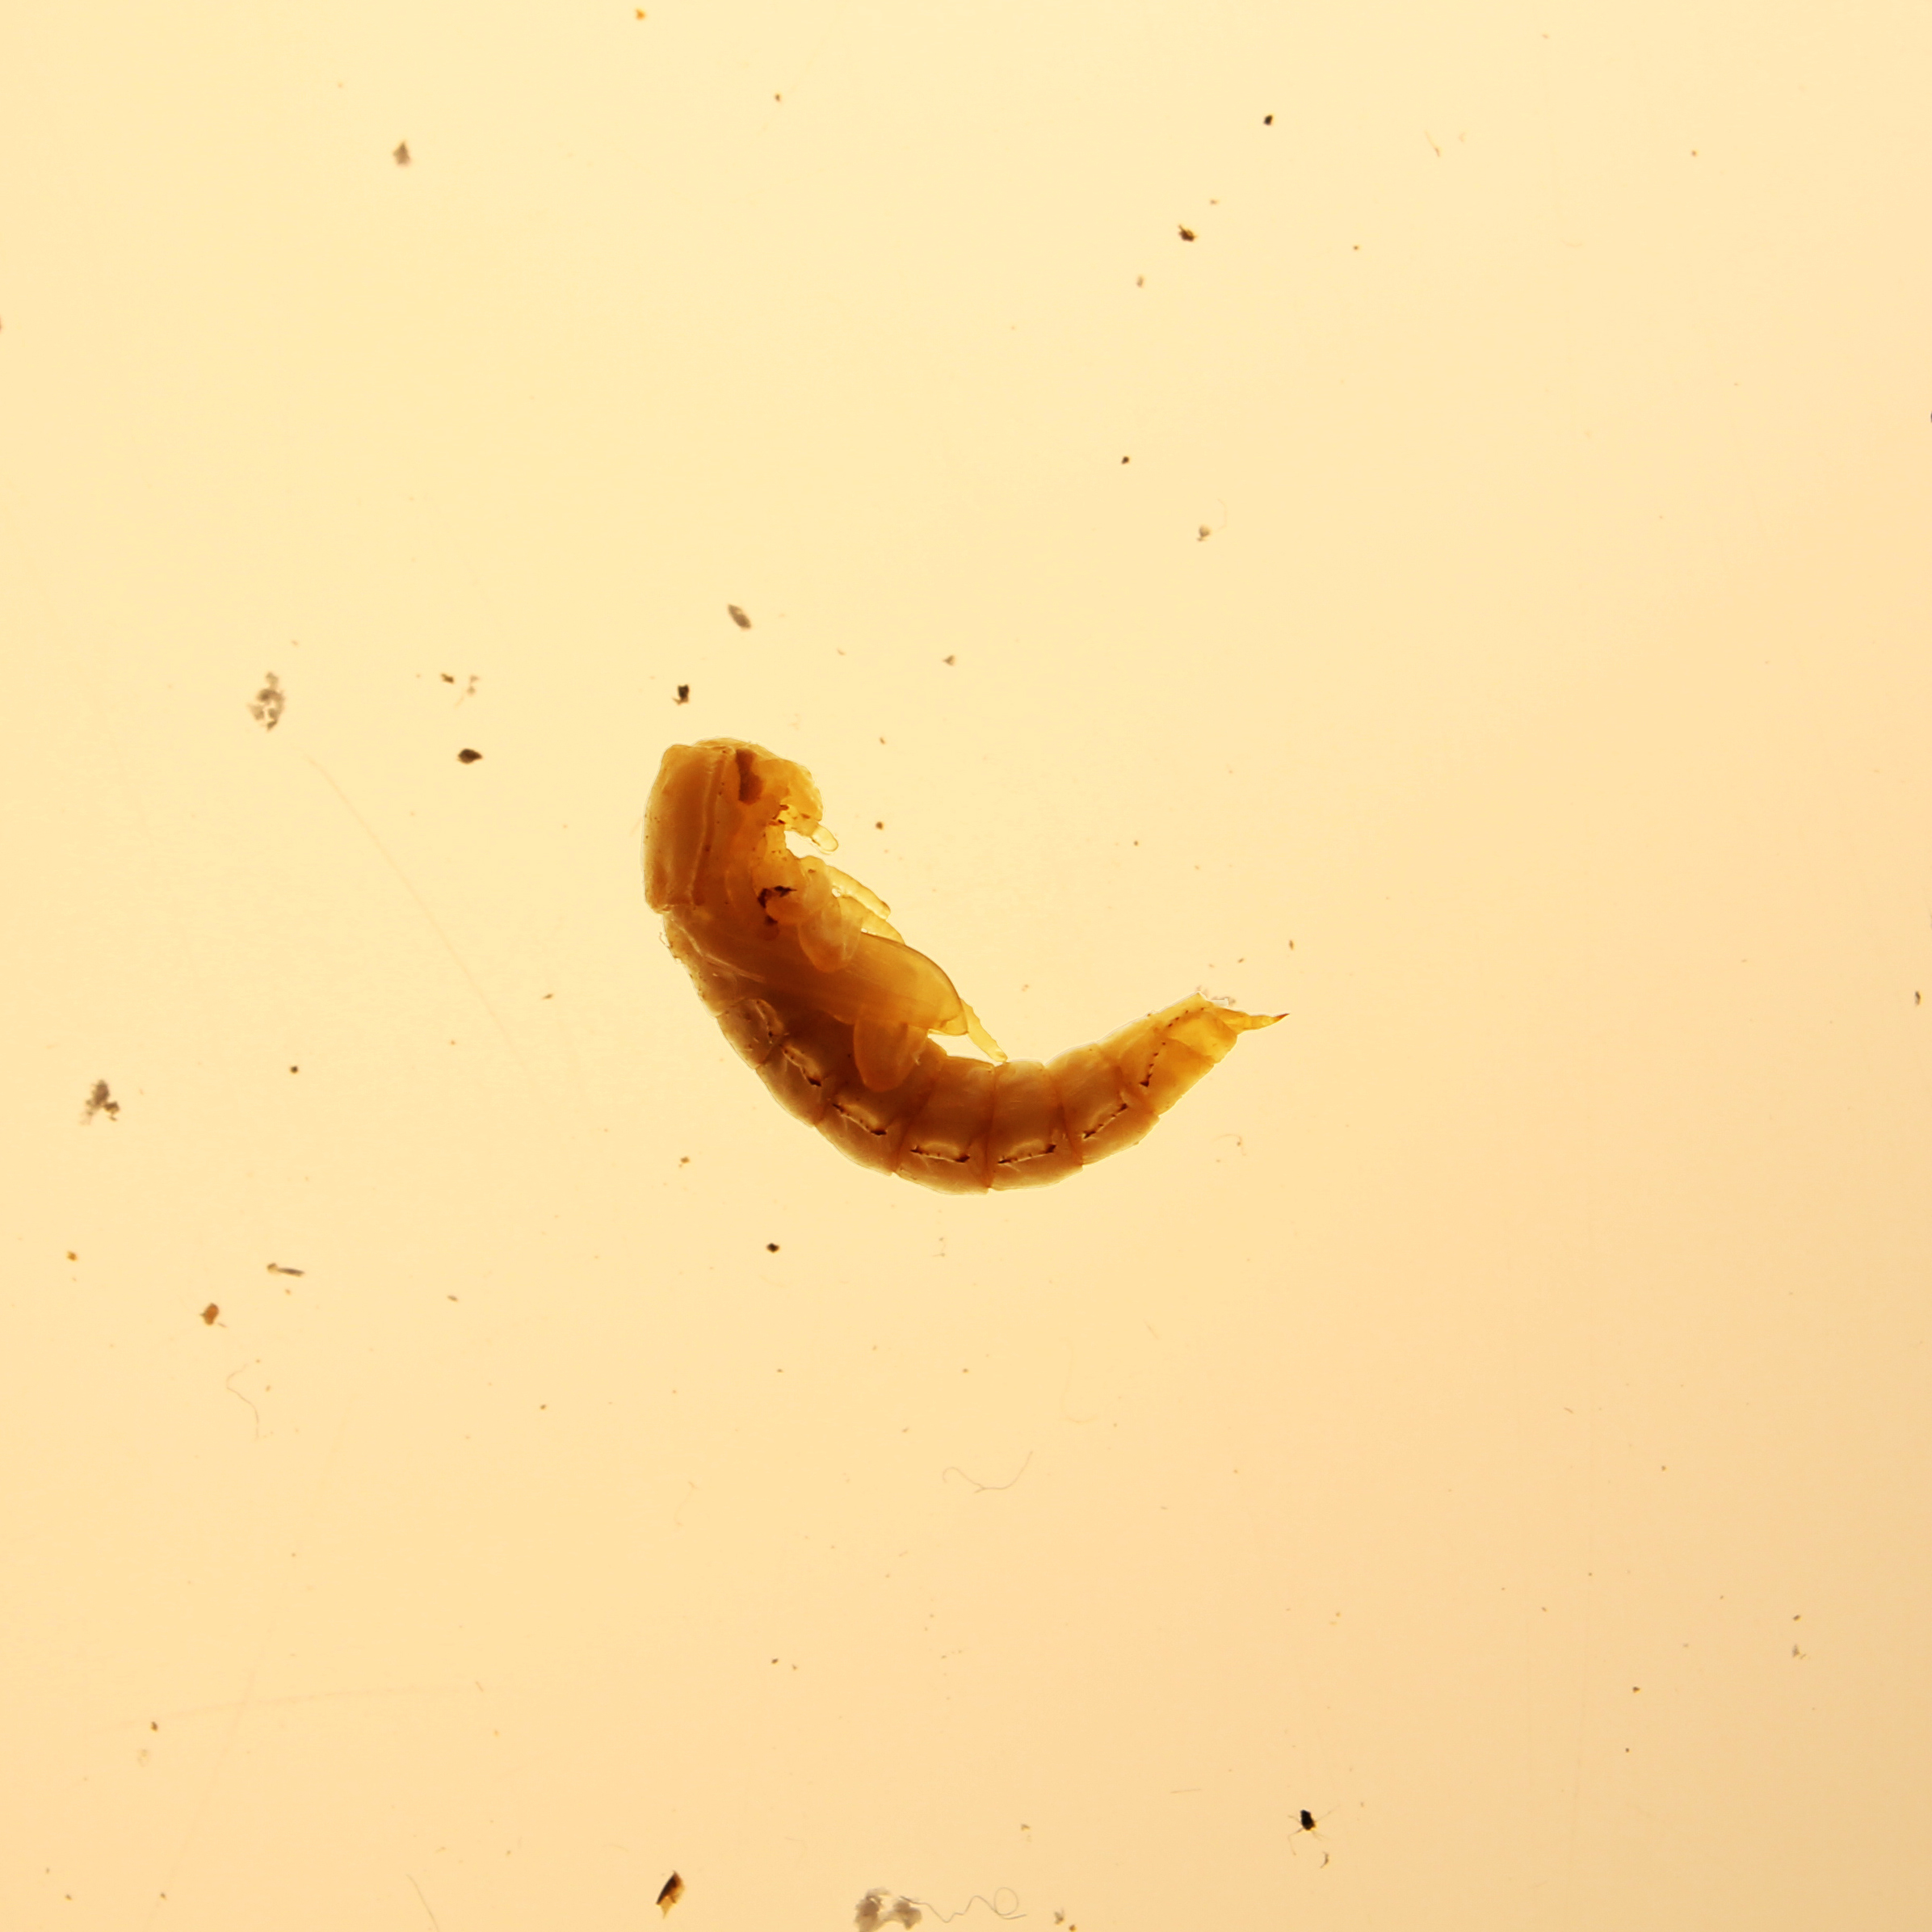  Mealworms are actually caterpillars, not worms and only the first shape they take in their journey throughout life. 